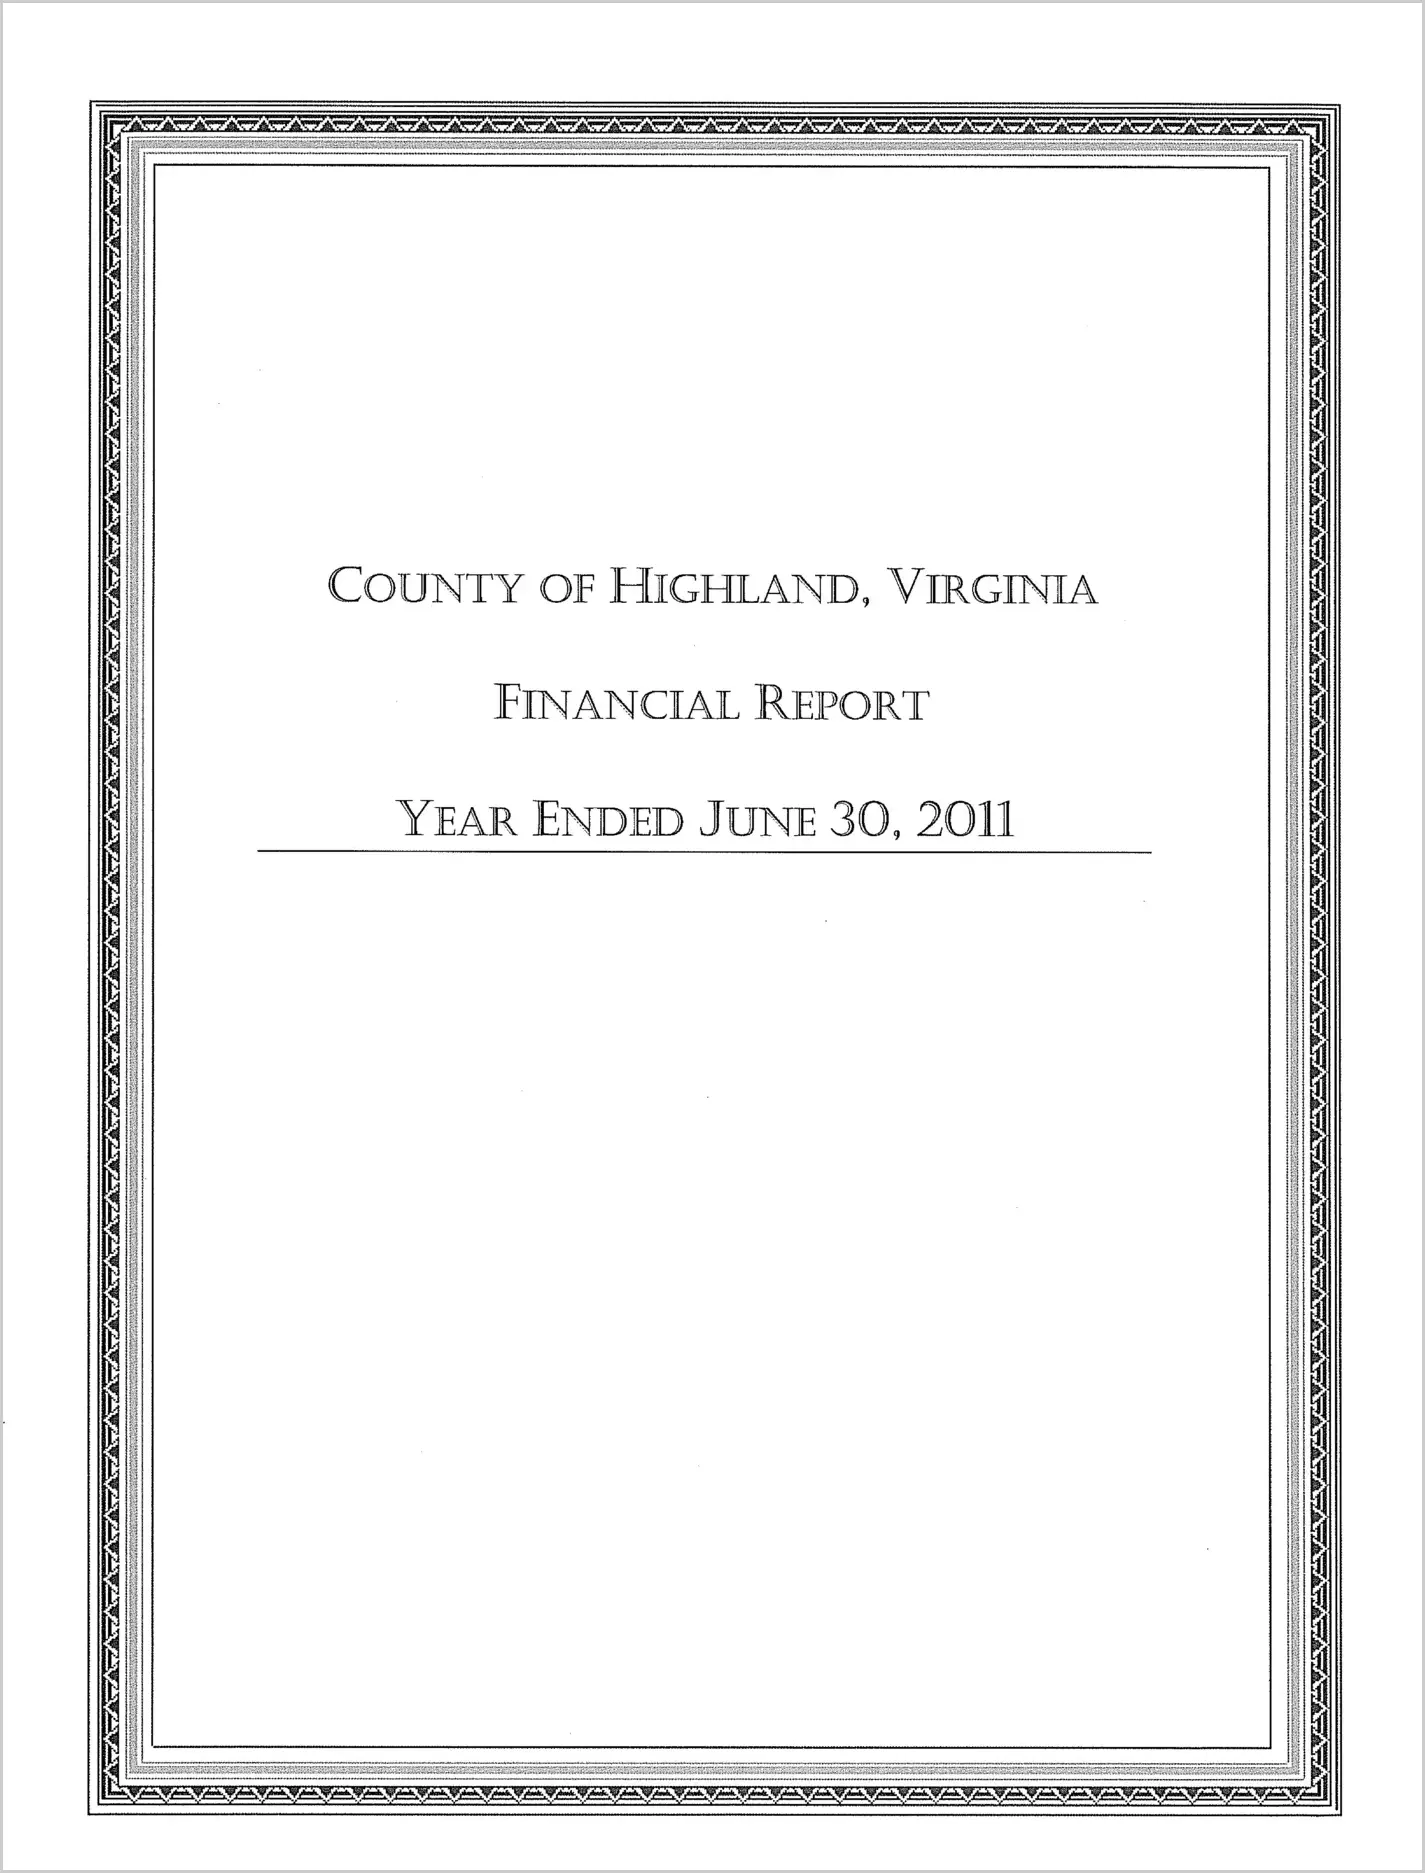 2010 Annual Financial Report for County of Highland